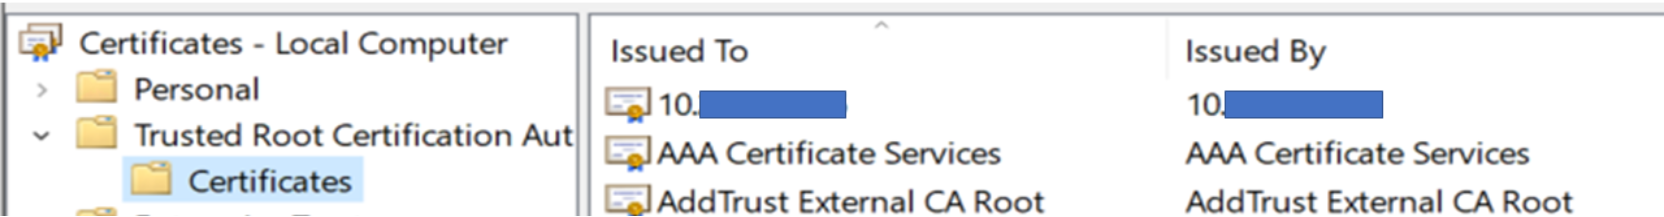 This shows an example of a successful imported certificate.